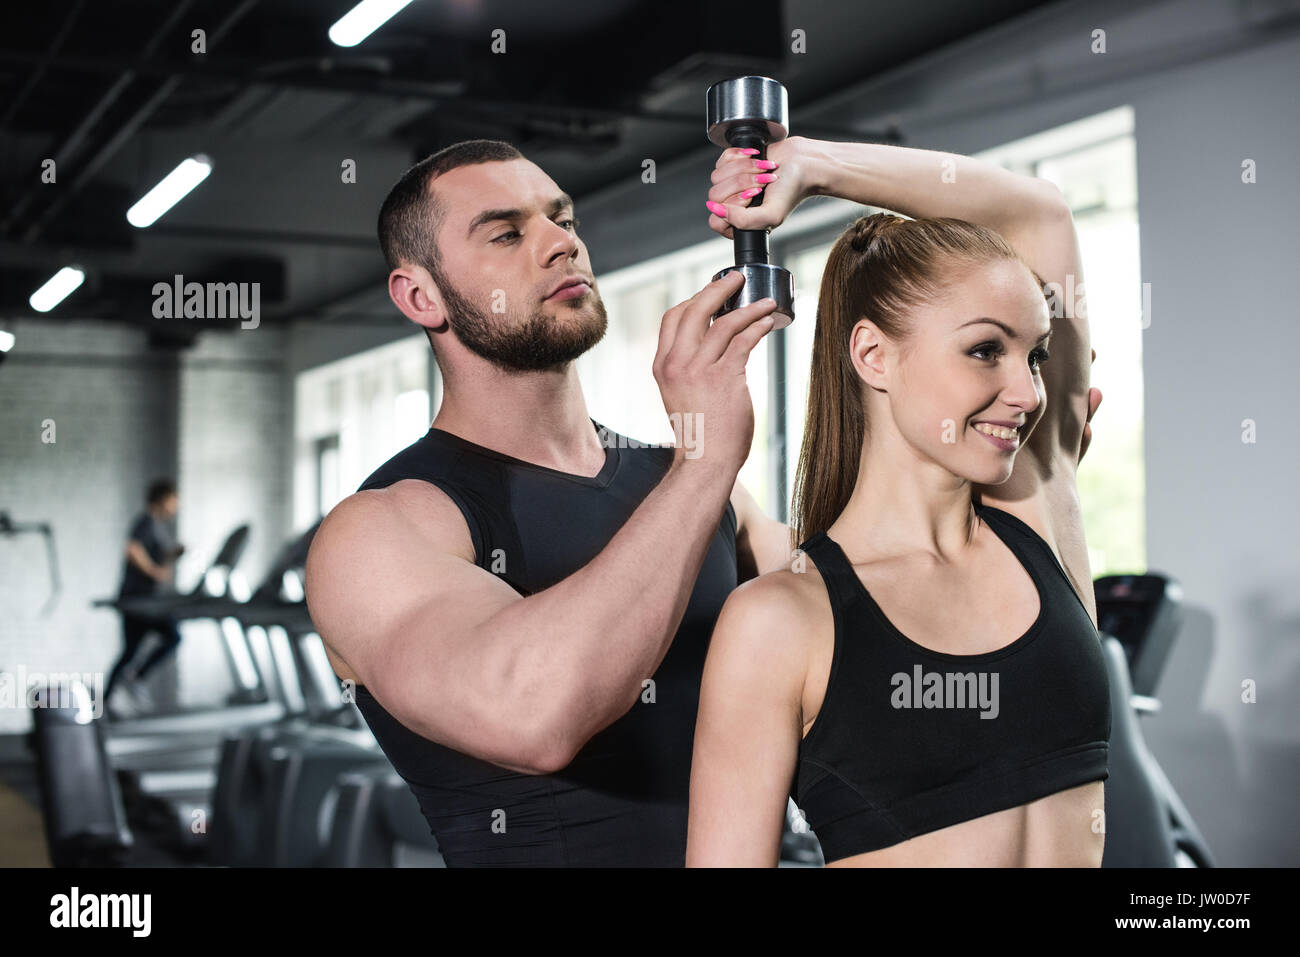 Aider les jeunes instructeurs smiling woman with dumbbell at gym Banque D'Images